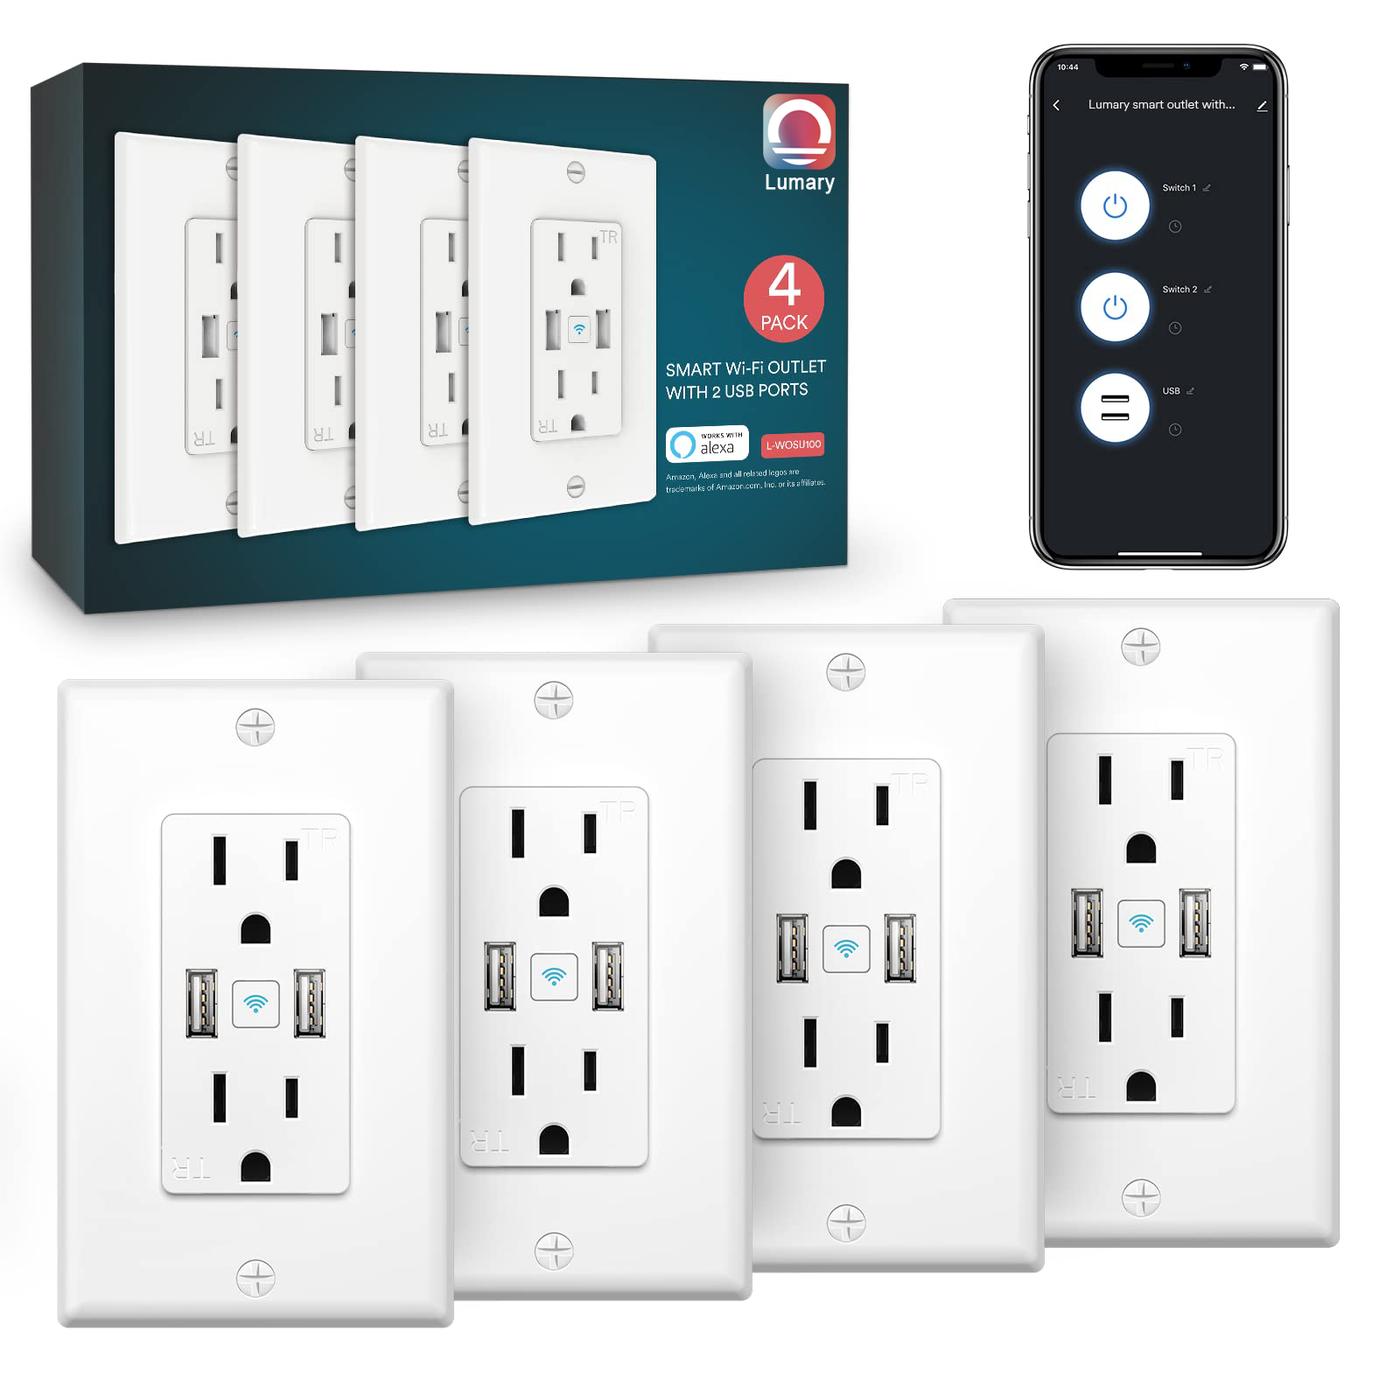 Lumary Smart Outlet Wall USB Charger Wi-Fi Power Socket